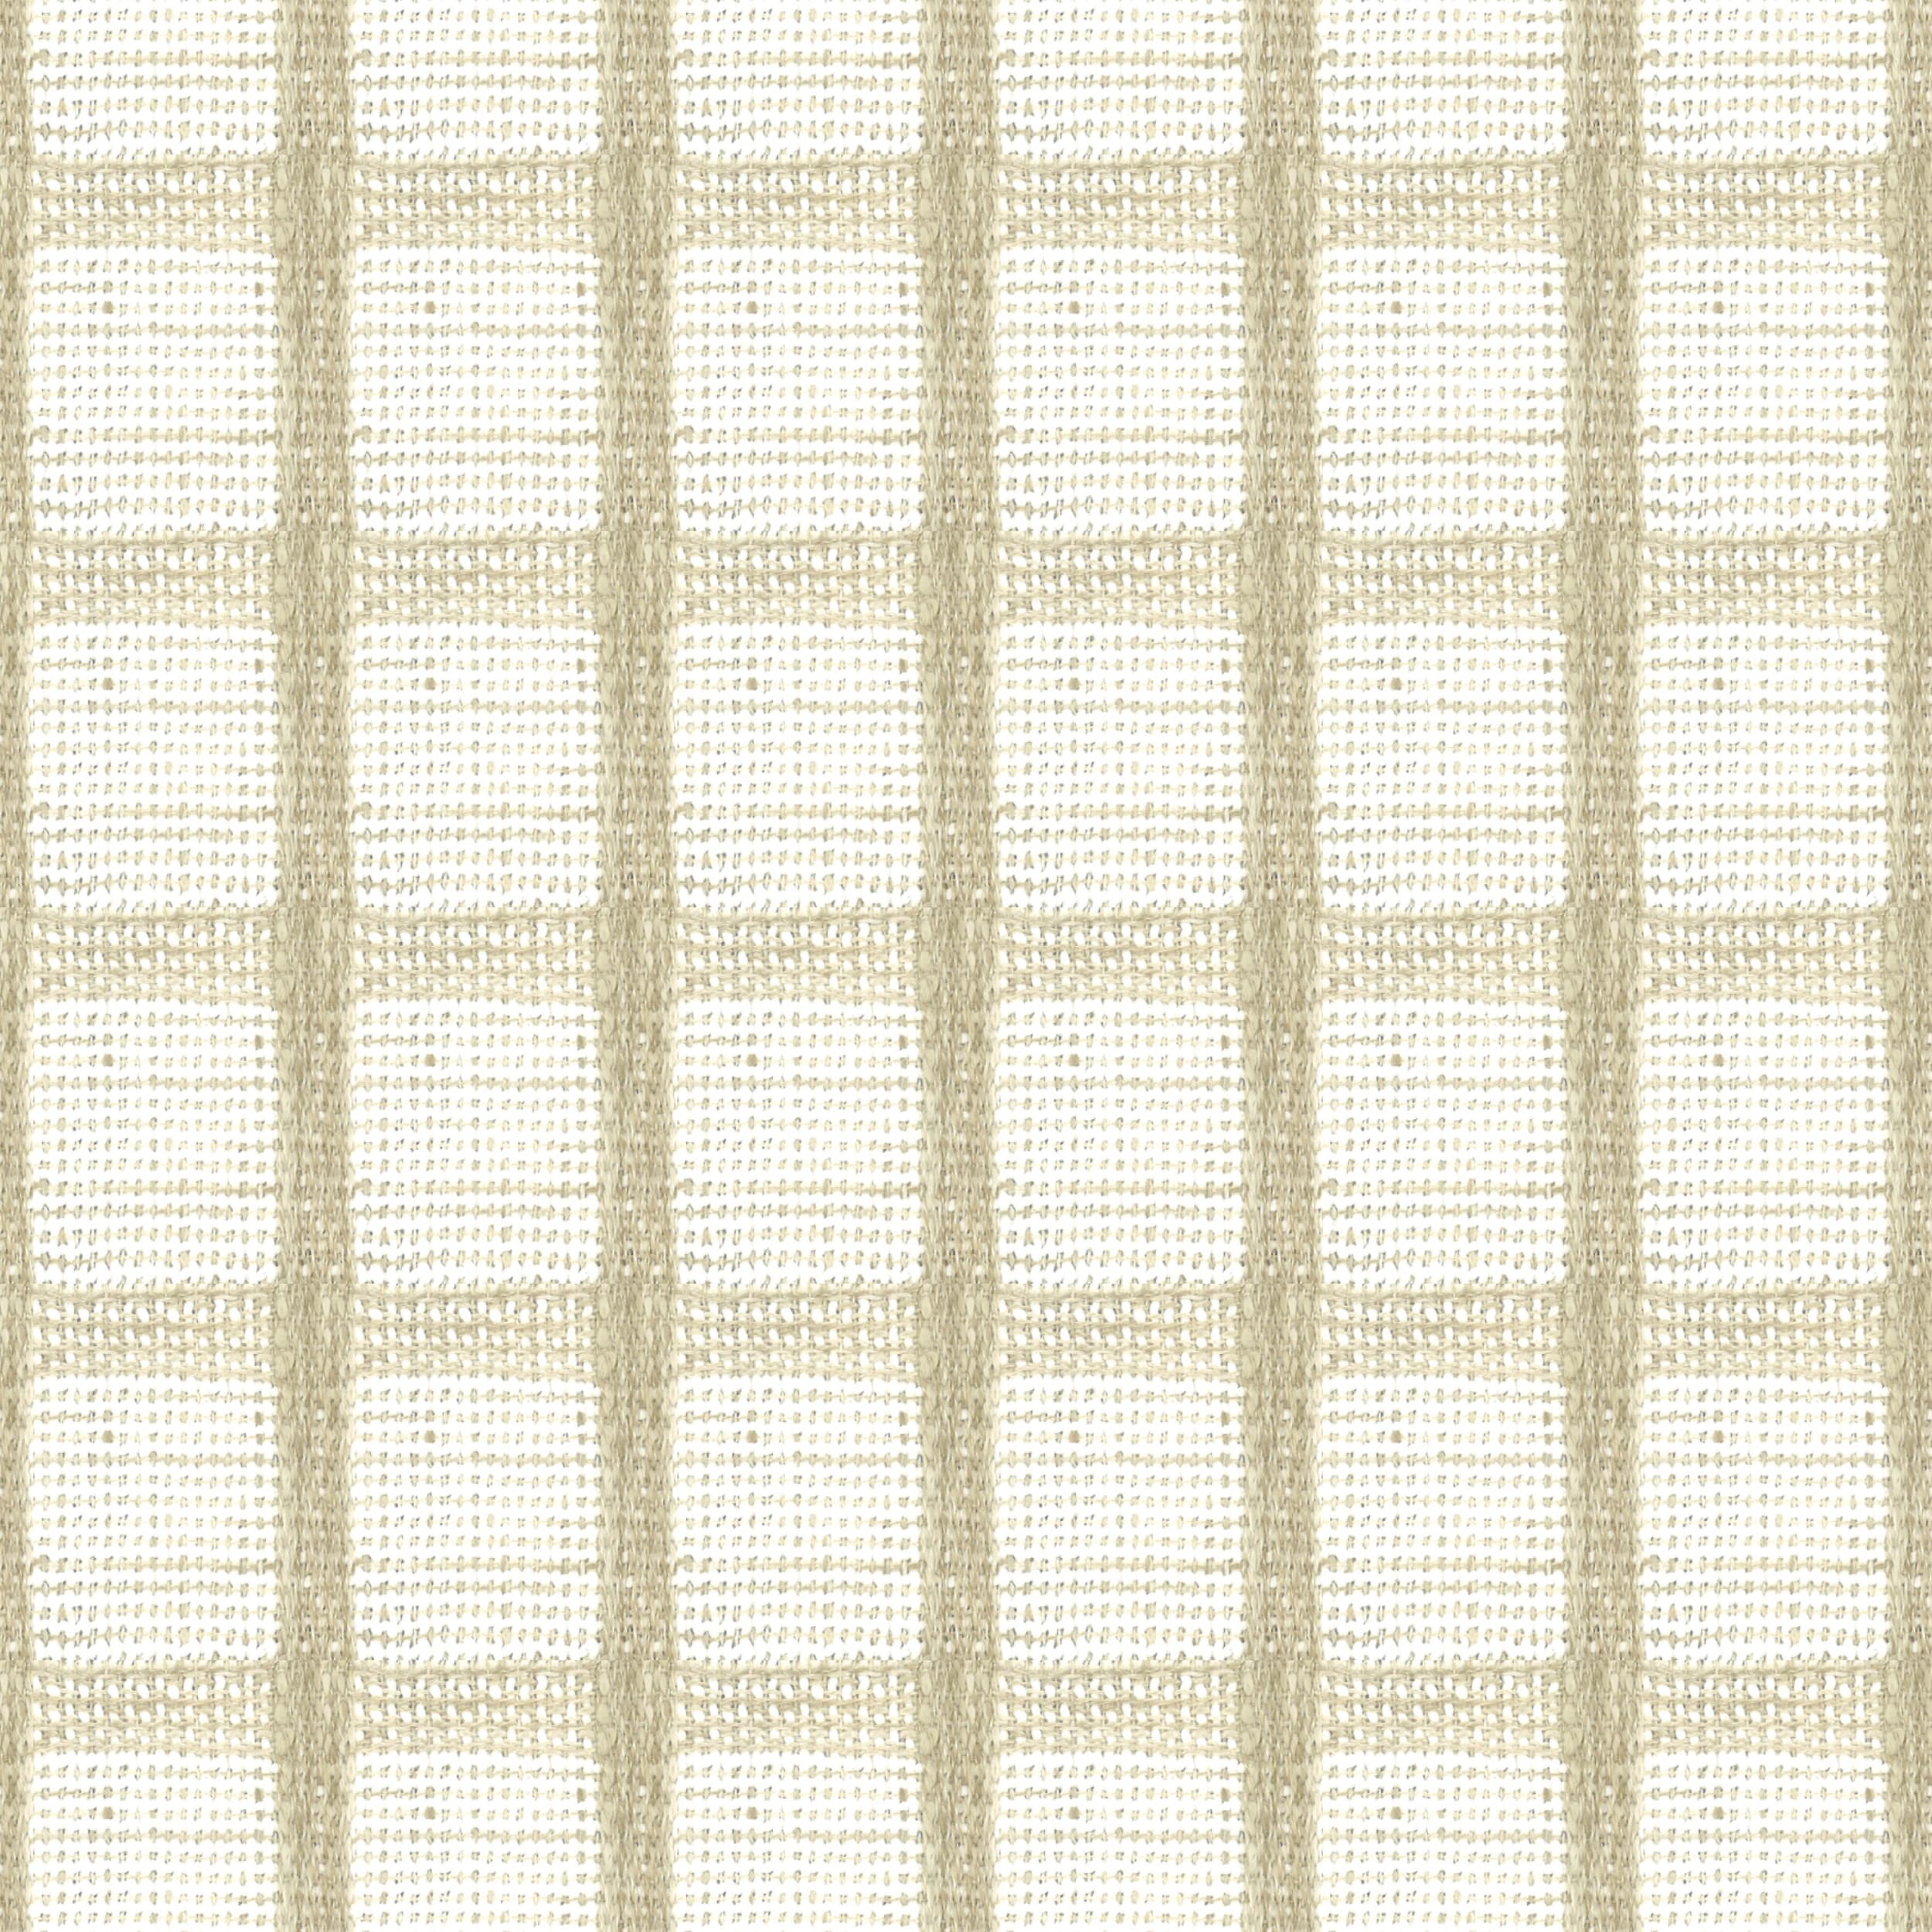 Reva 1 Beige by Stout Fabric